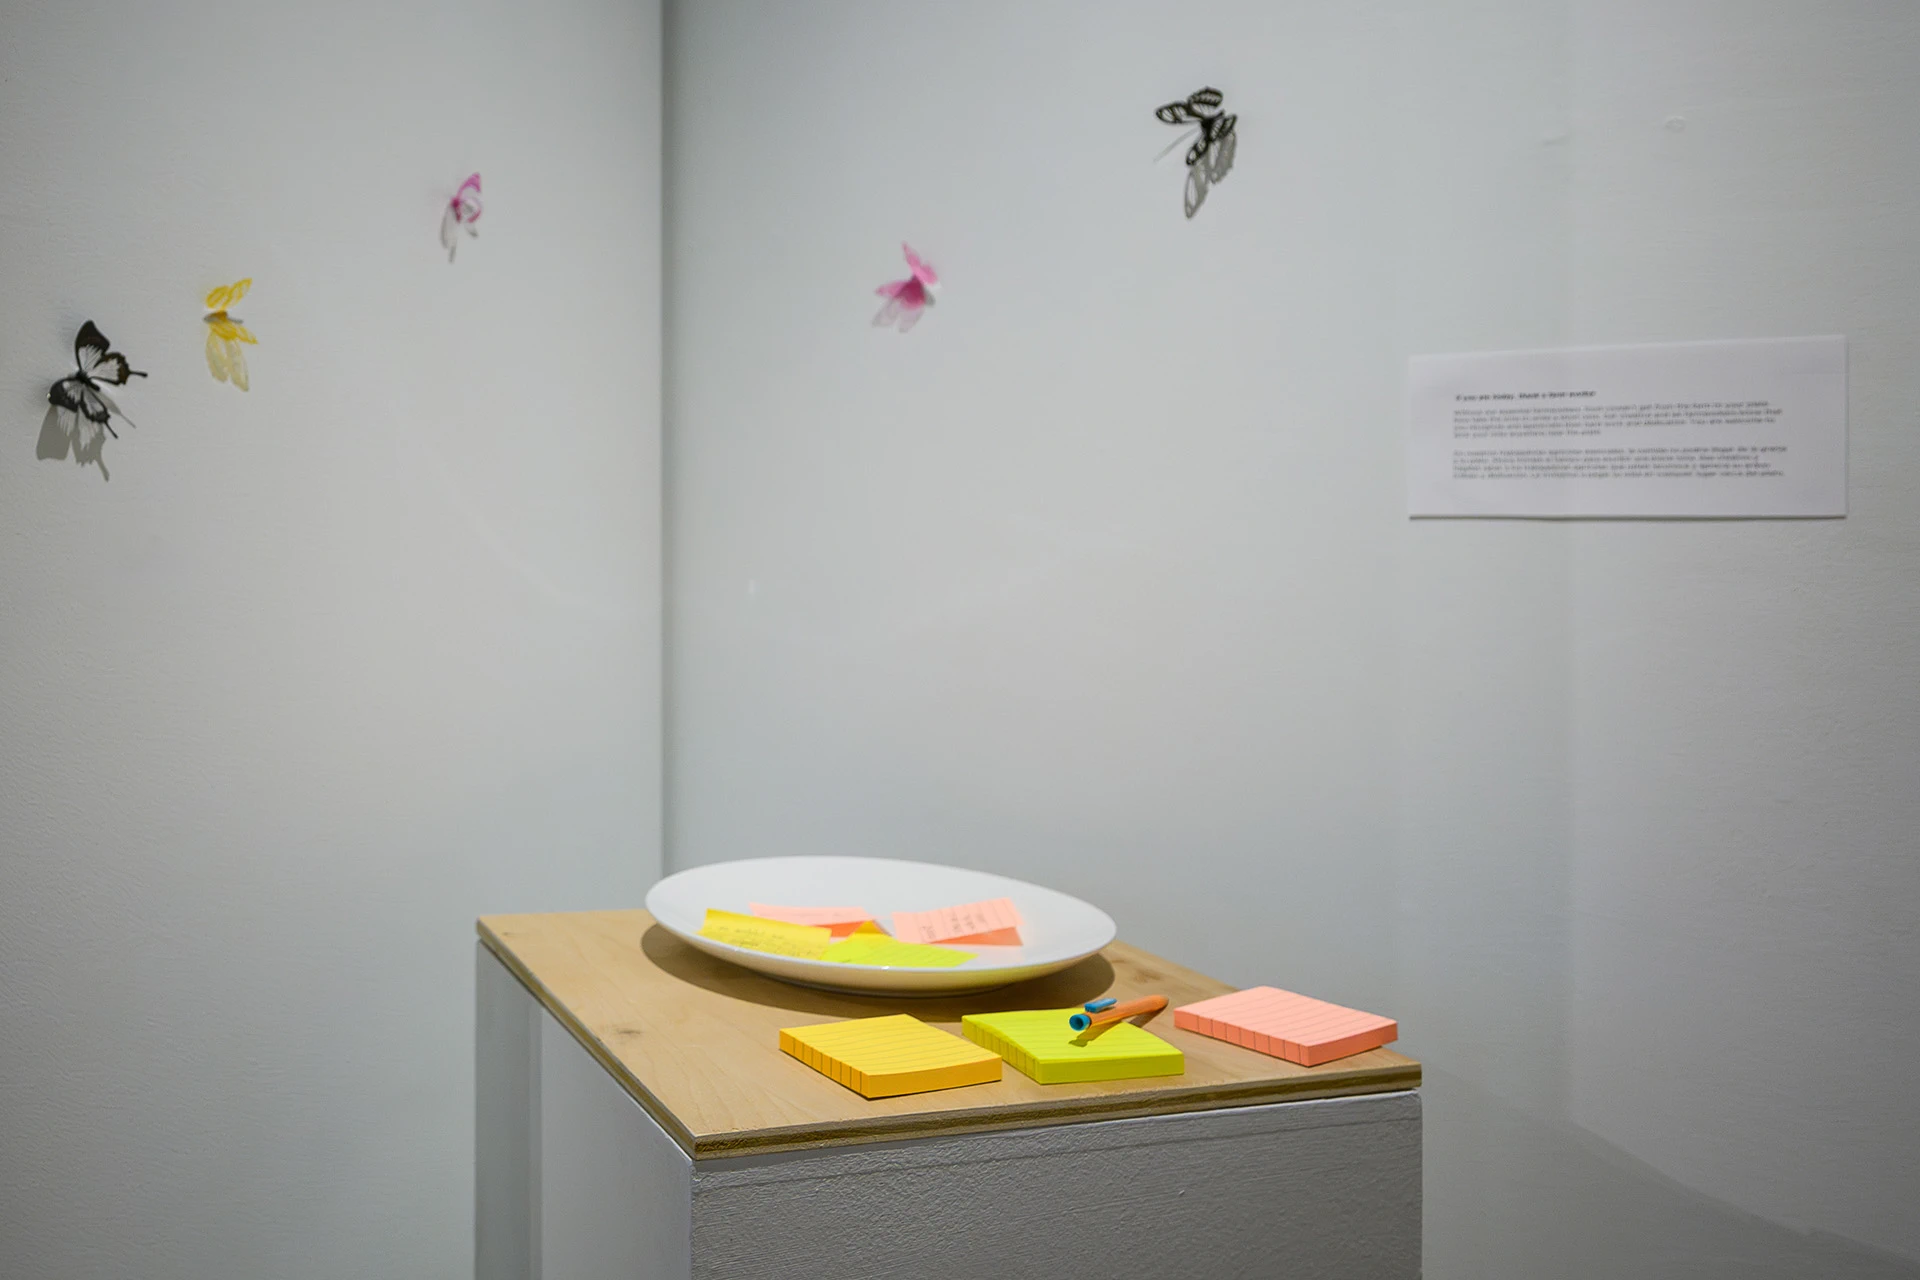 An empty plate is adorned by sticky notes conveying messages of gratitude to migrant farmworkers for bringing food to plates